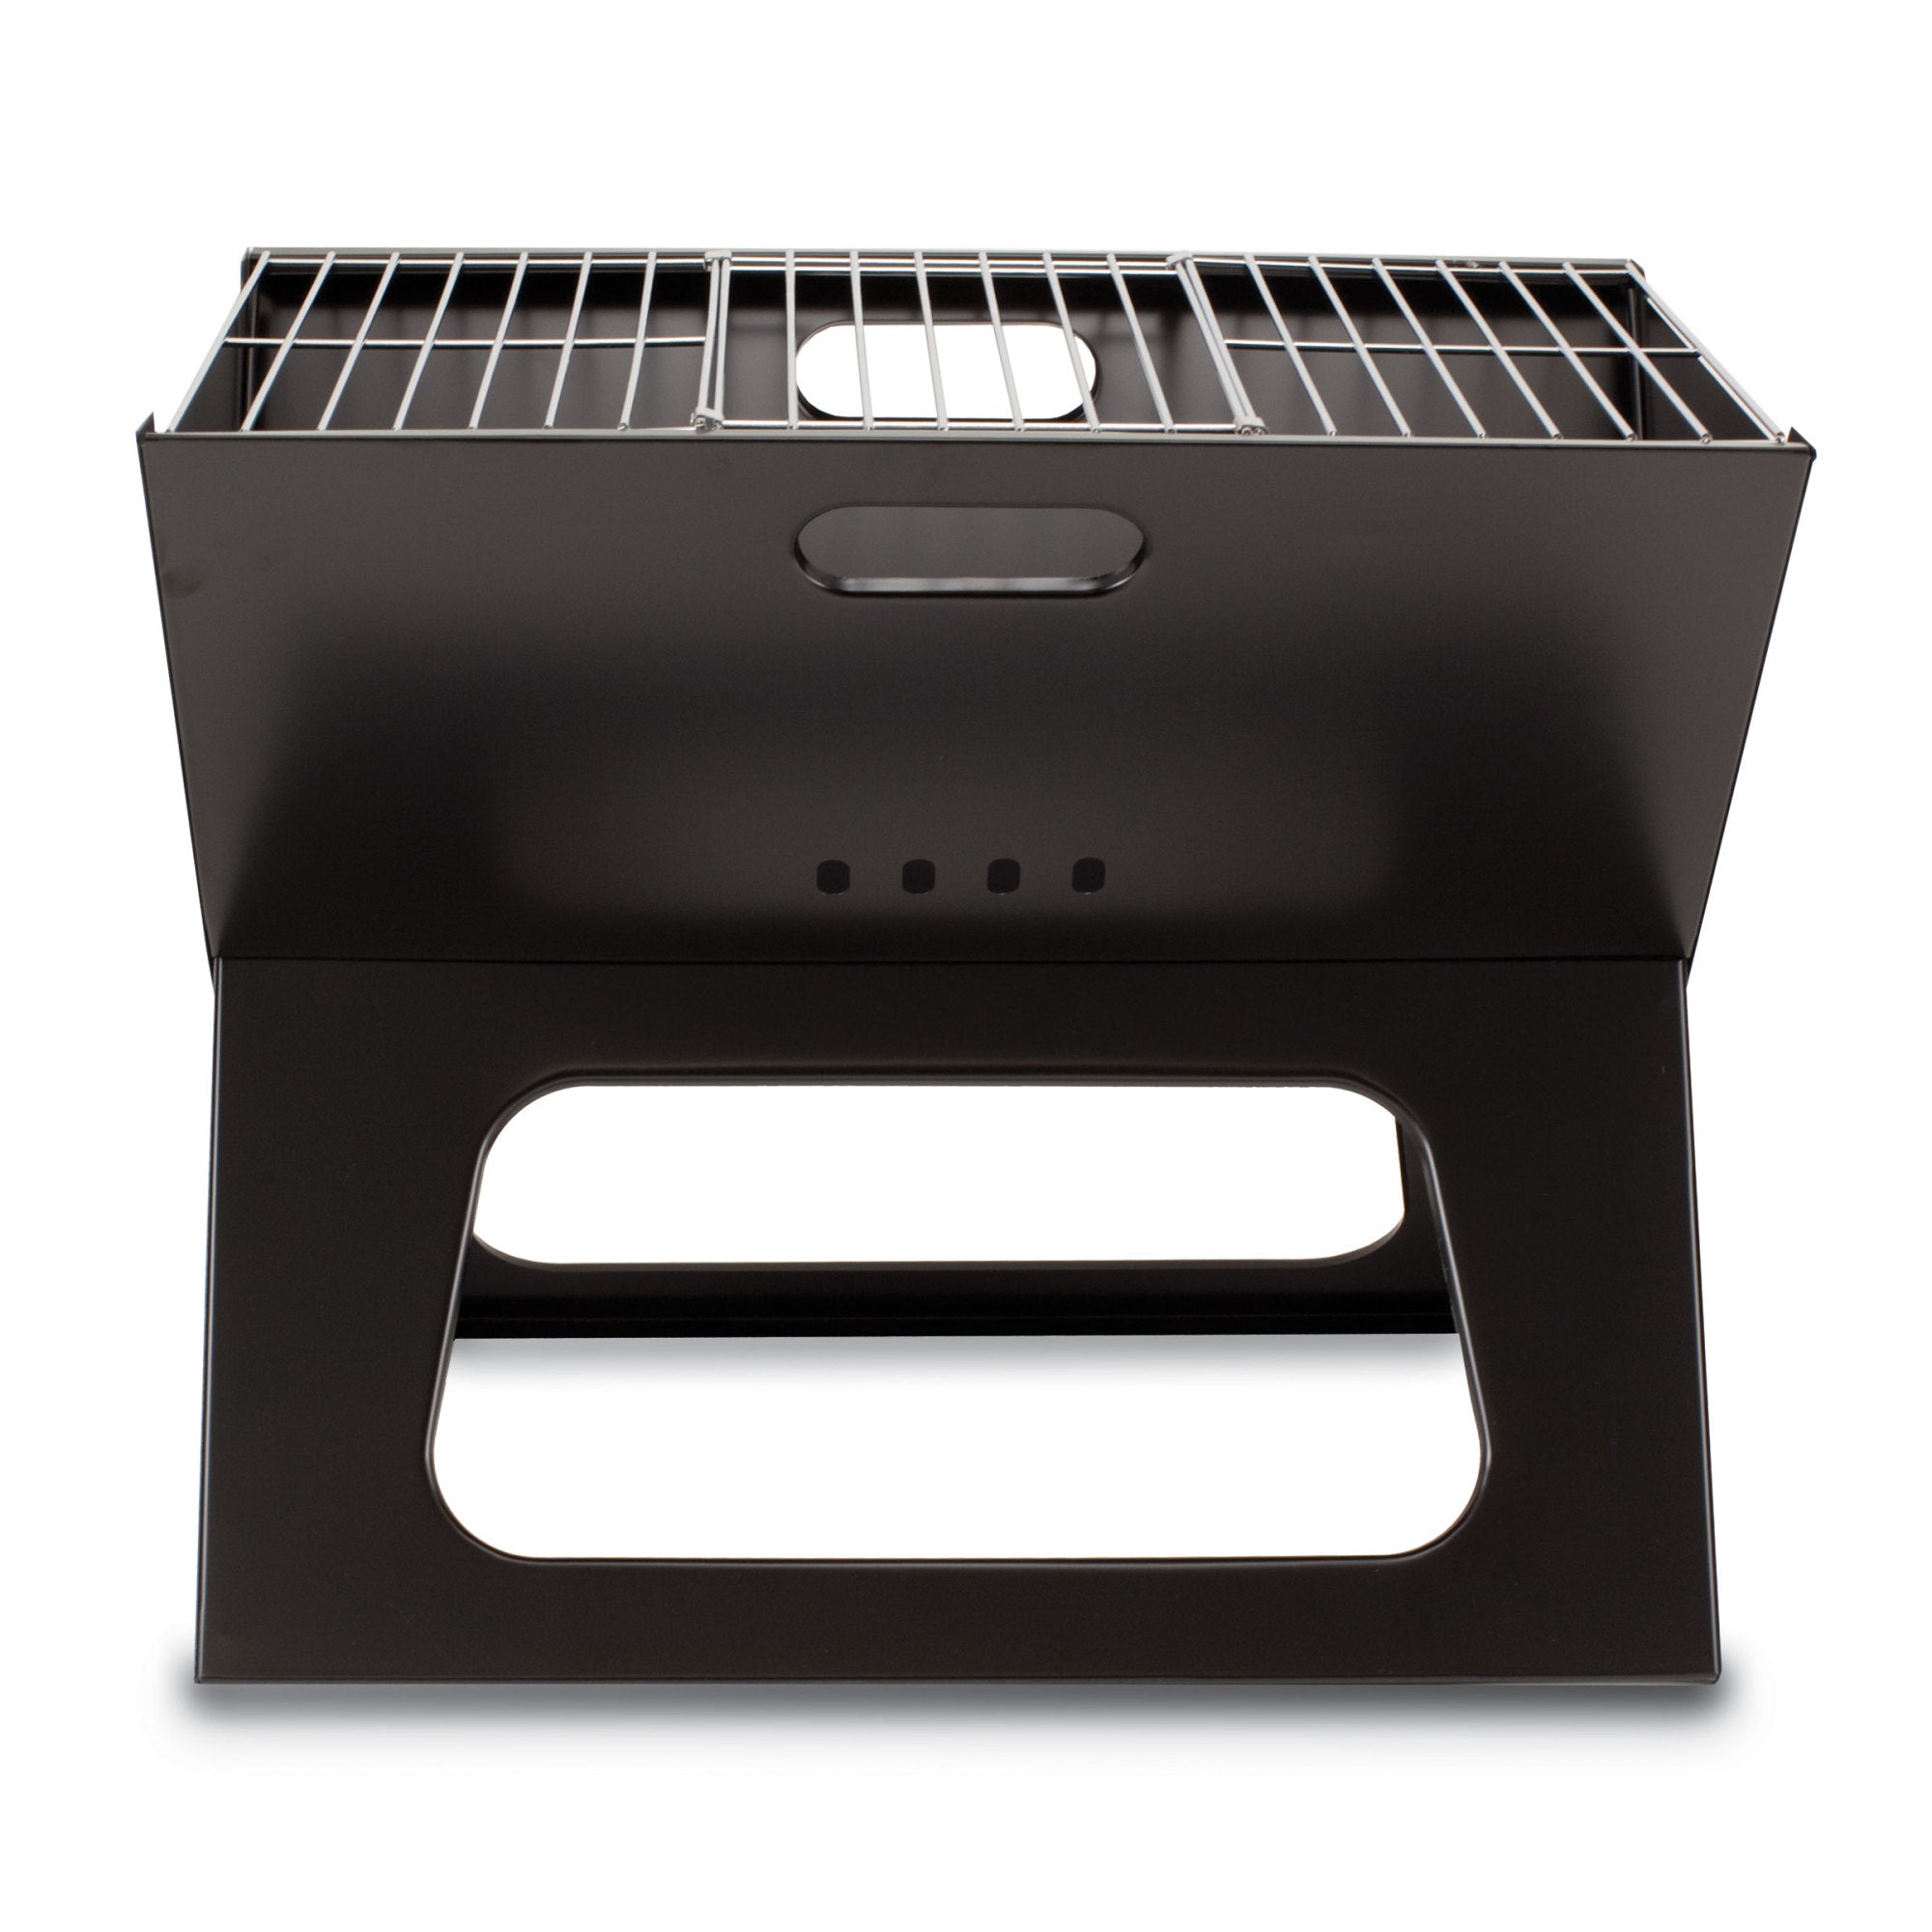 Tampa Bay Rays - X-Grill Portable Charcoal BBQ Grill